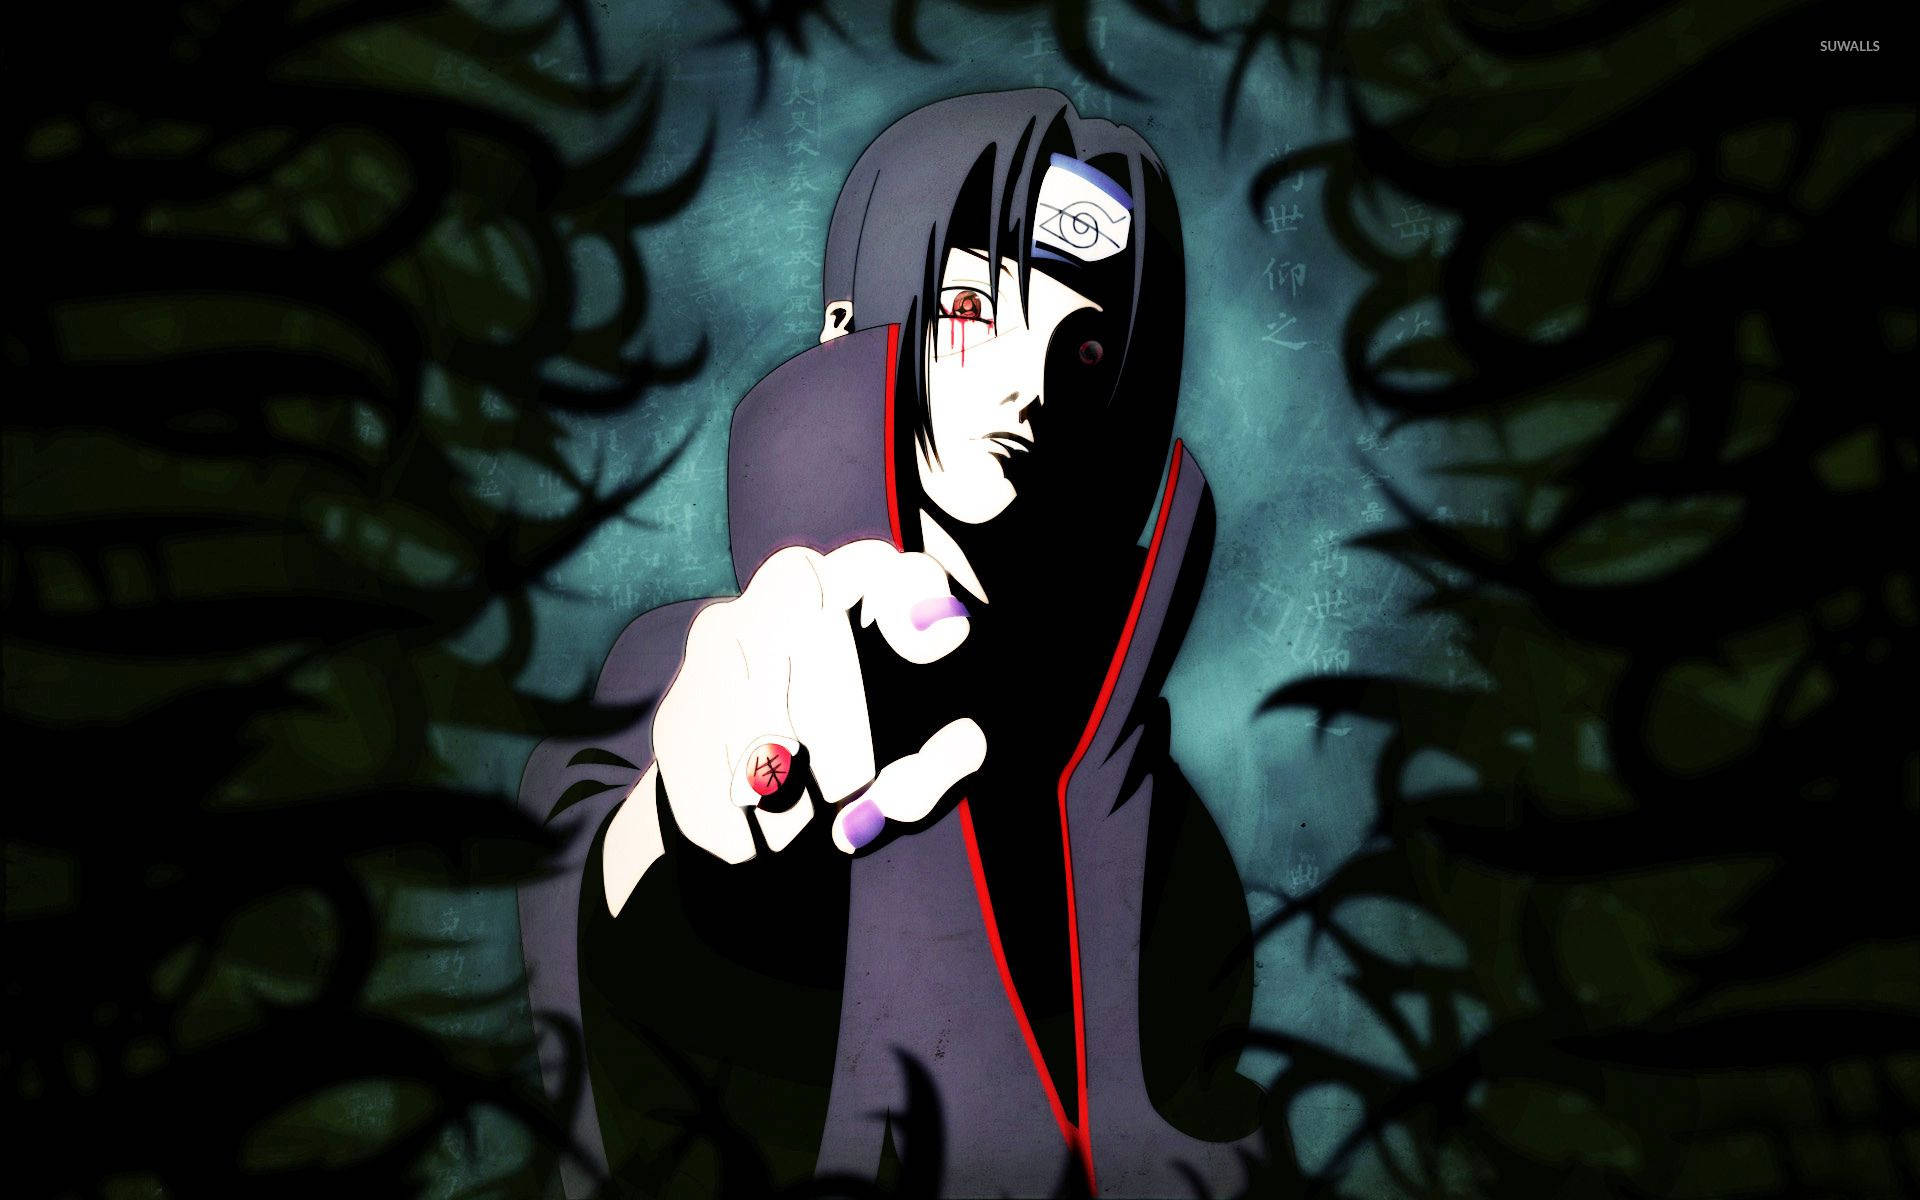 "Reach higher and become strong through unwavering conviction"–Itachi Uchiha Wallpaper